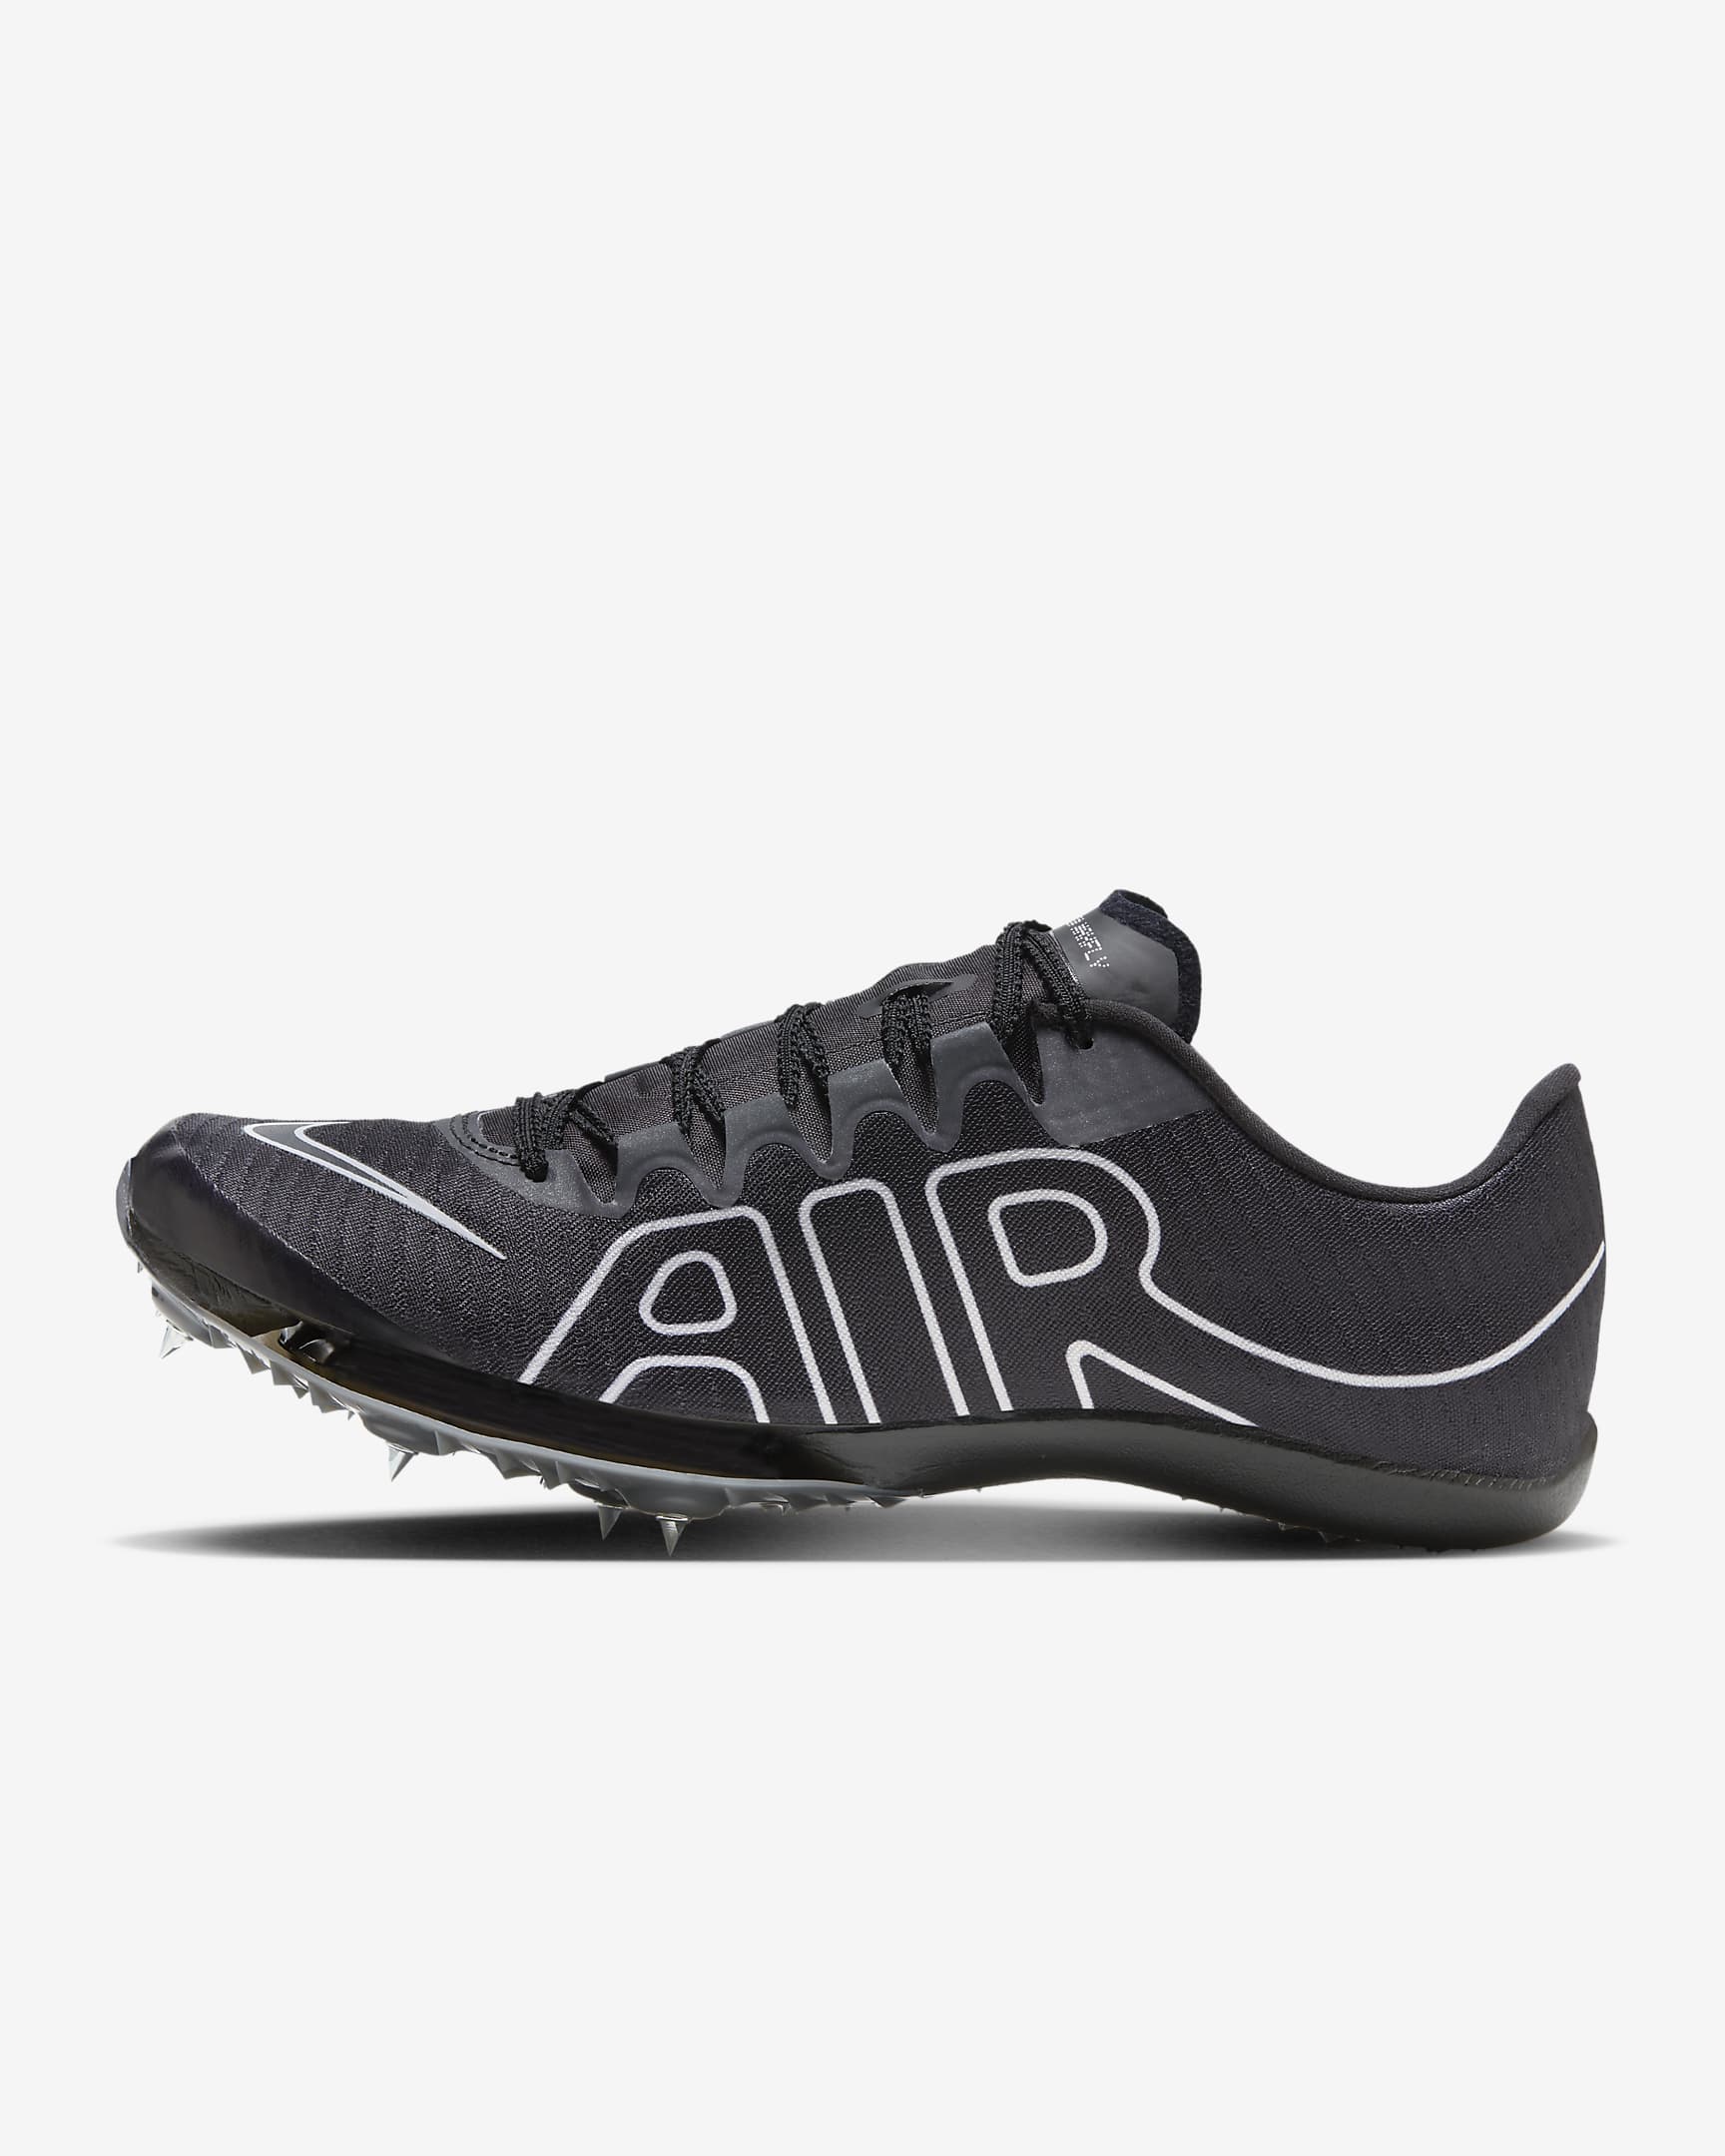 Nike Air Zoom Maxfly More Uptempo Athletics Sprinting Spikes. Nike MY